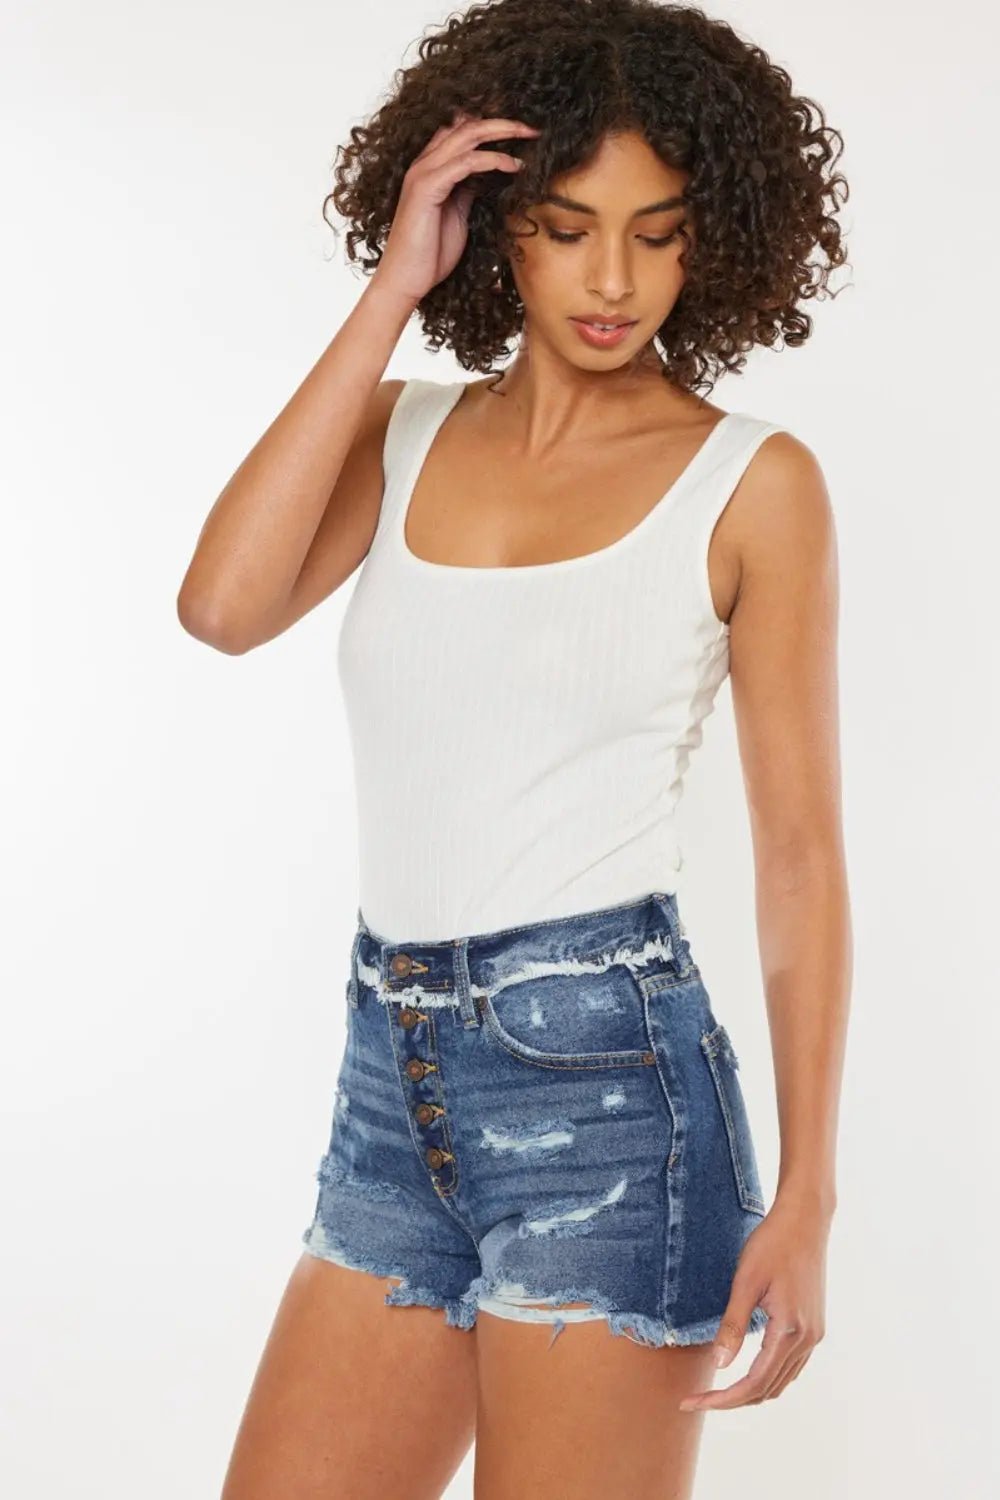 DISTRESSED DENIM BUTTON FLY SHORTS - MeadeuxDISTRESSED DENIM BUTTON FLY SHORTSShortsMeadeux